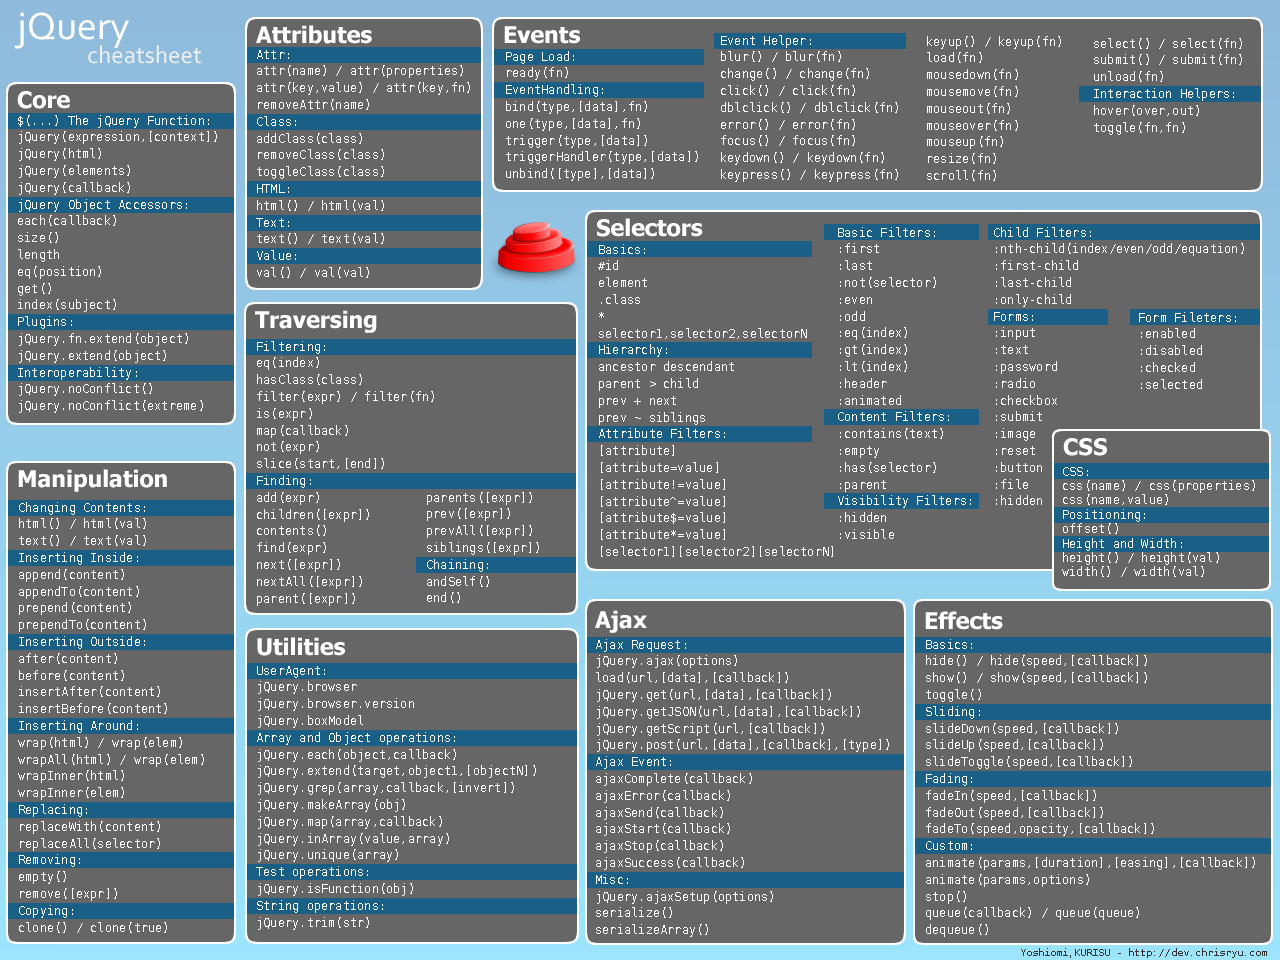 20 Useful jQuery Cheatsheets and References